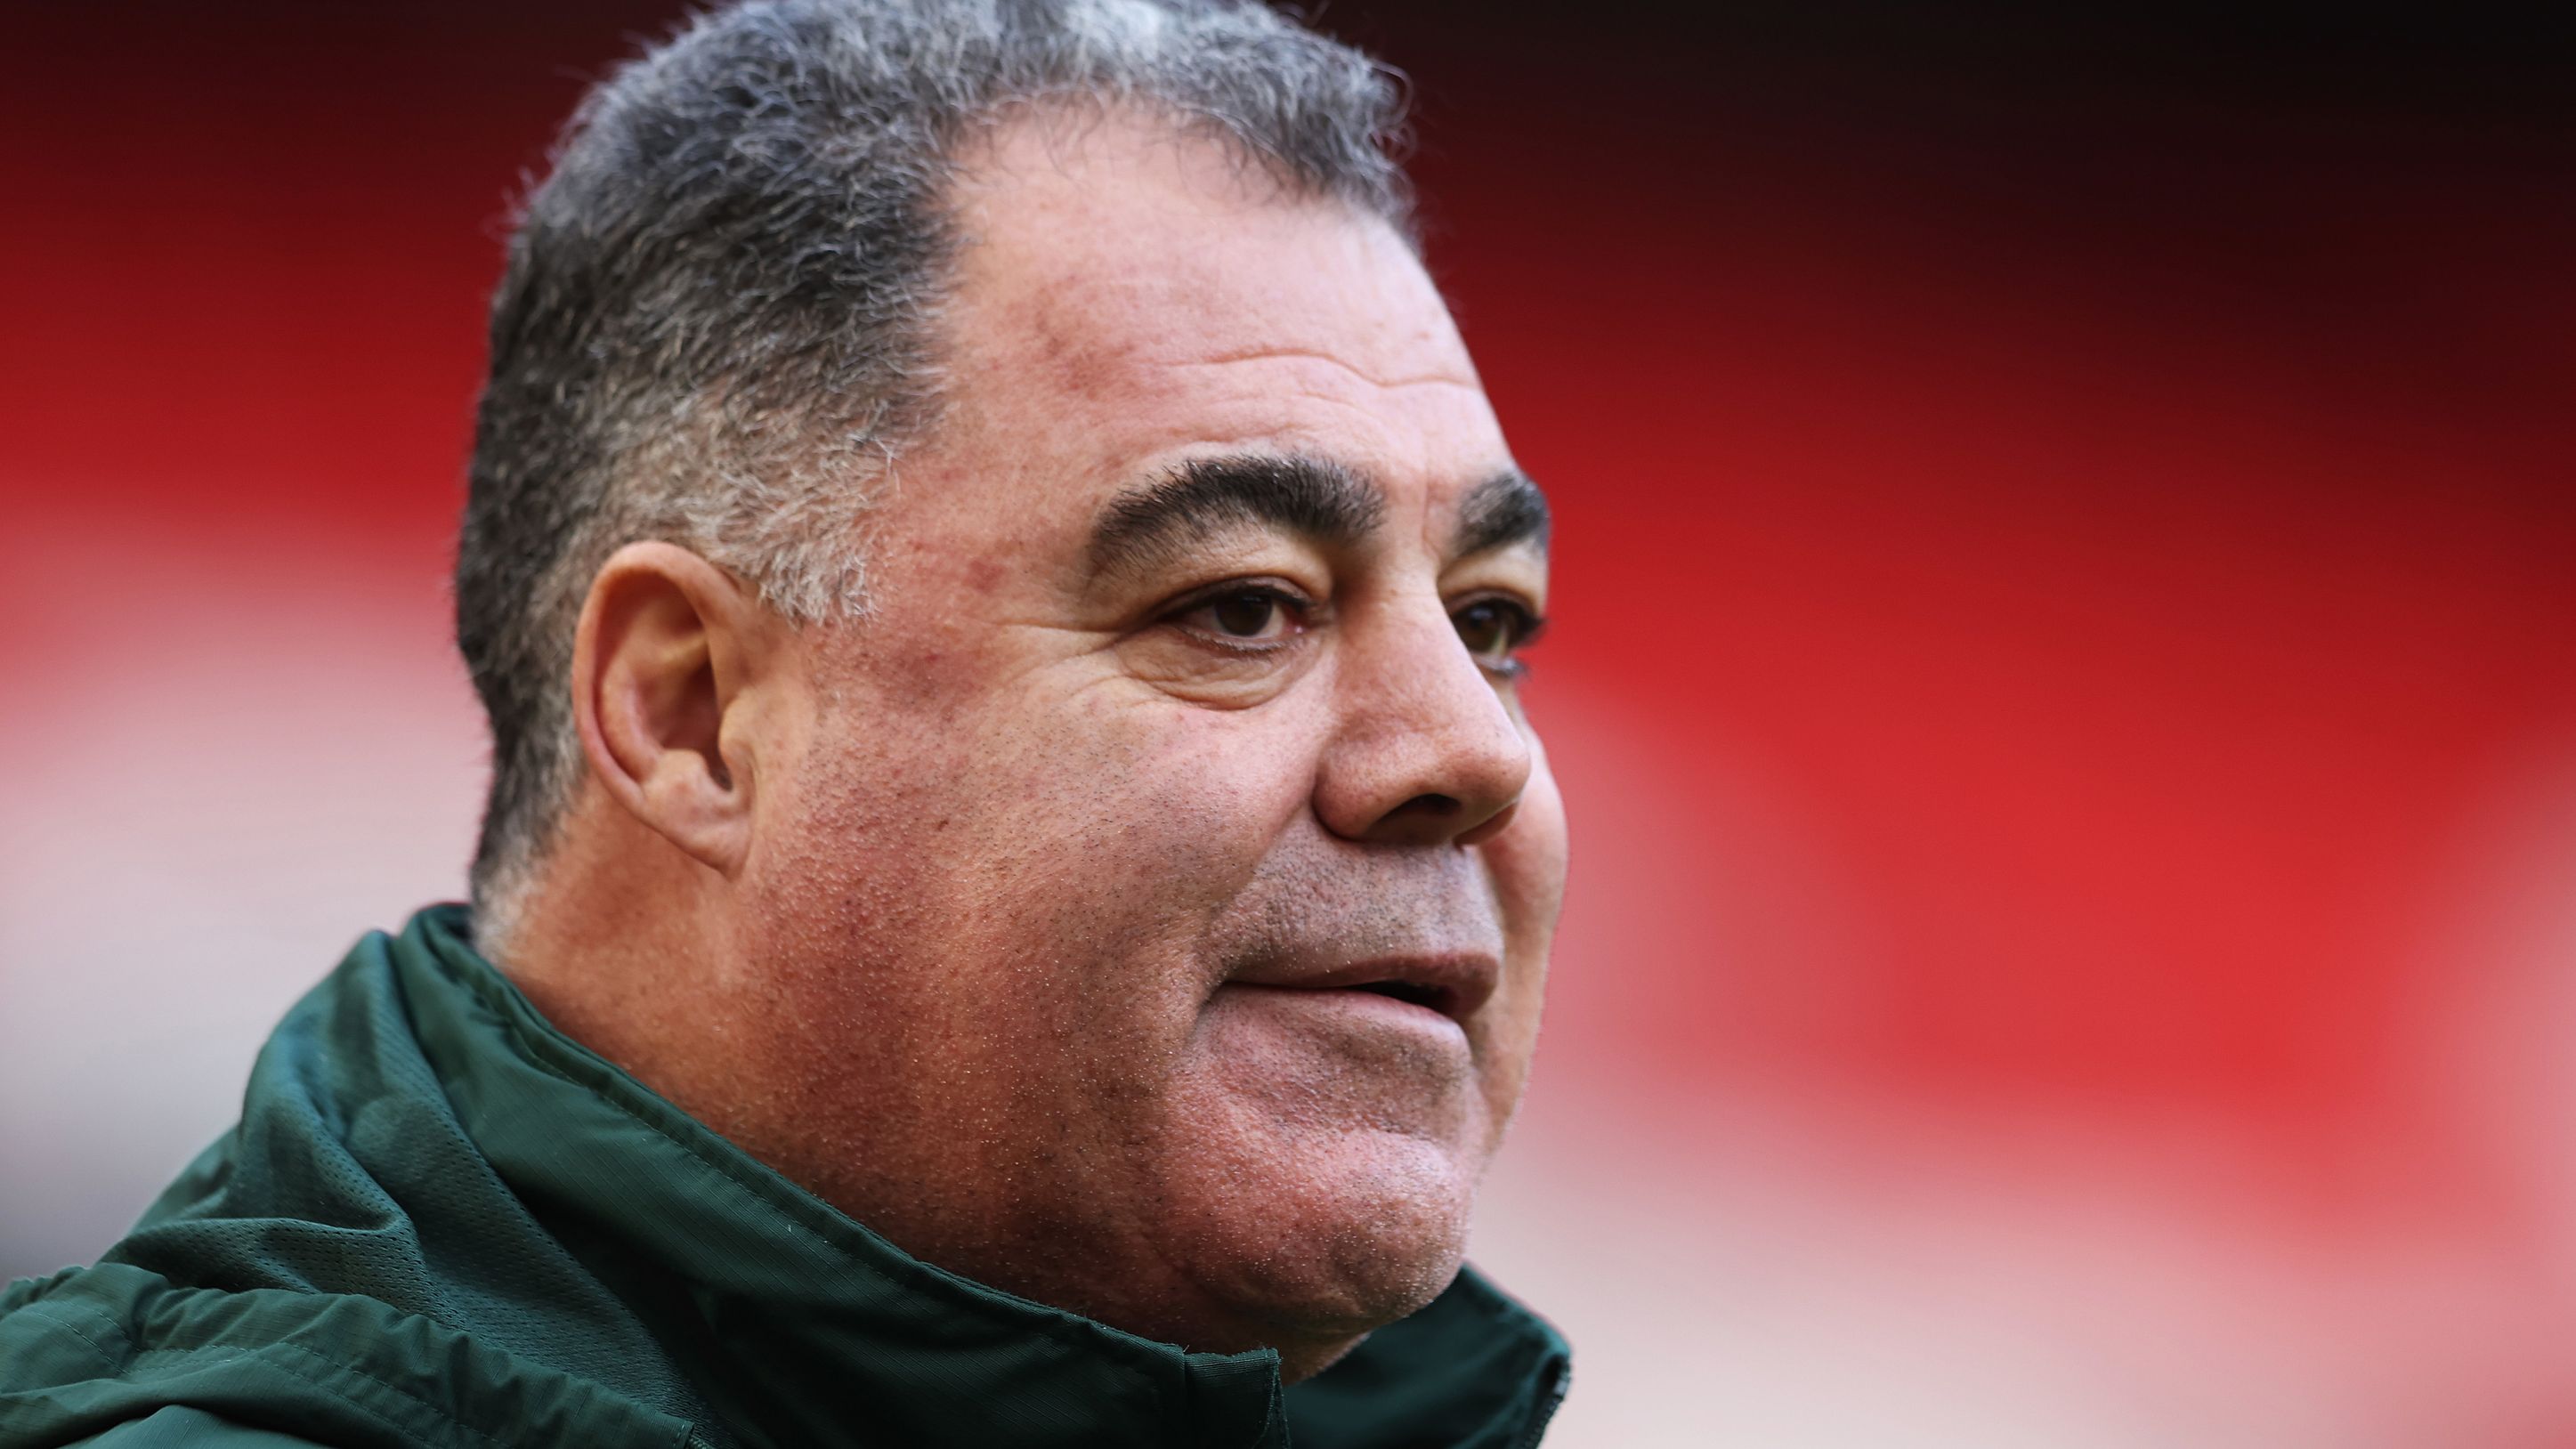 MANCHESTER, ENGLAND - NOVEMBER 18: Mal Meninga, Head Coach of Australia during the Australia Captain&#x27;s Run ahead of the Rugby League World Cup Final against Samoa at Old Trafford on November 18, 2022 in Manchester, England. (Photo by Matthew Lewis/Getty Images for RLWC)